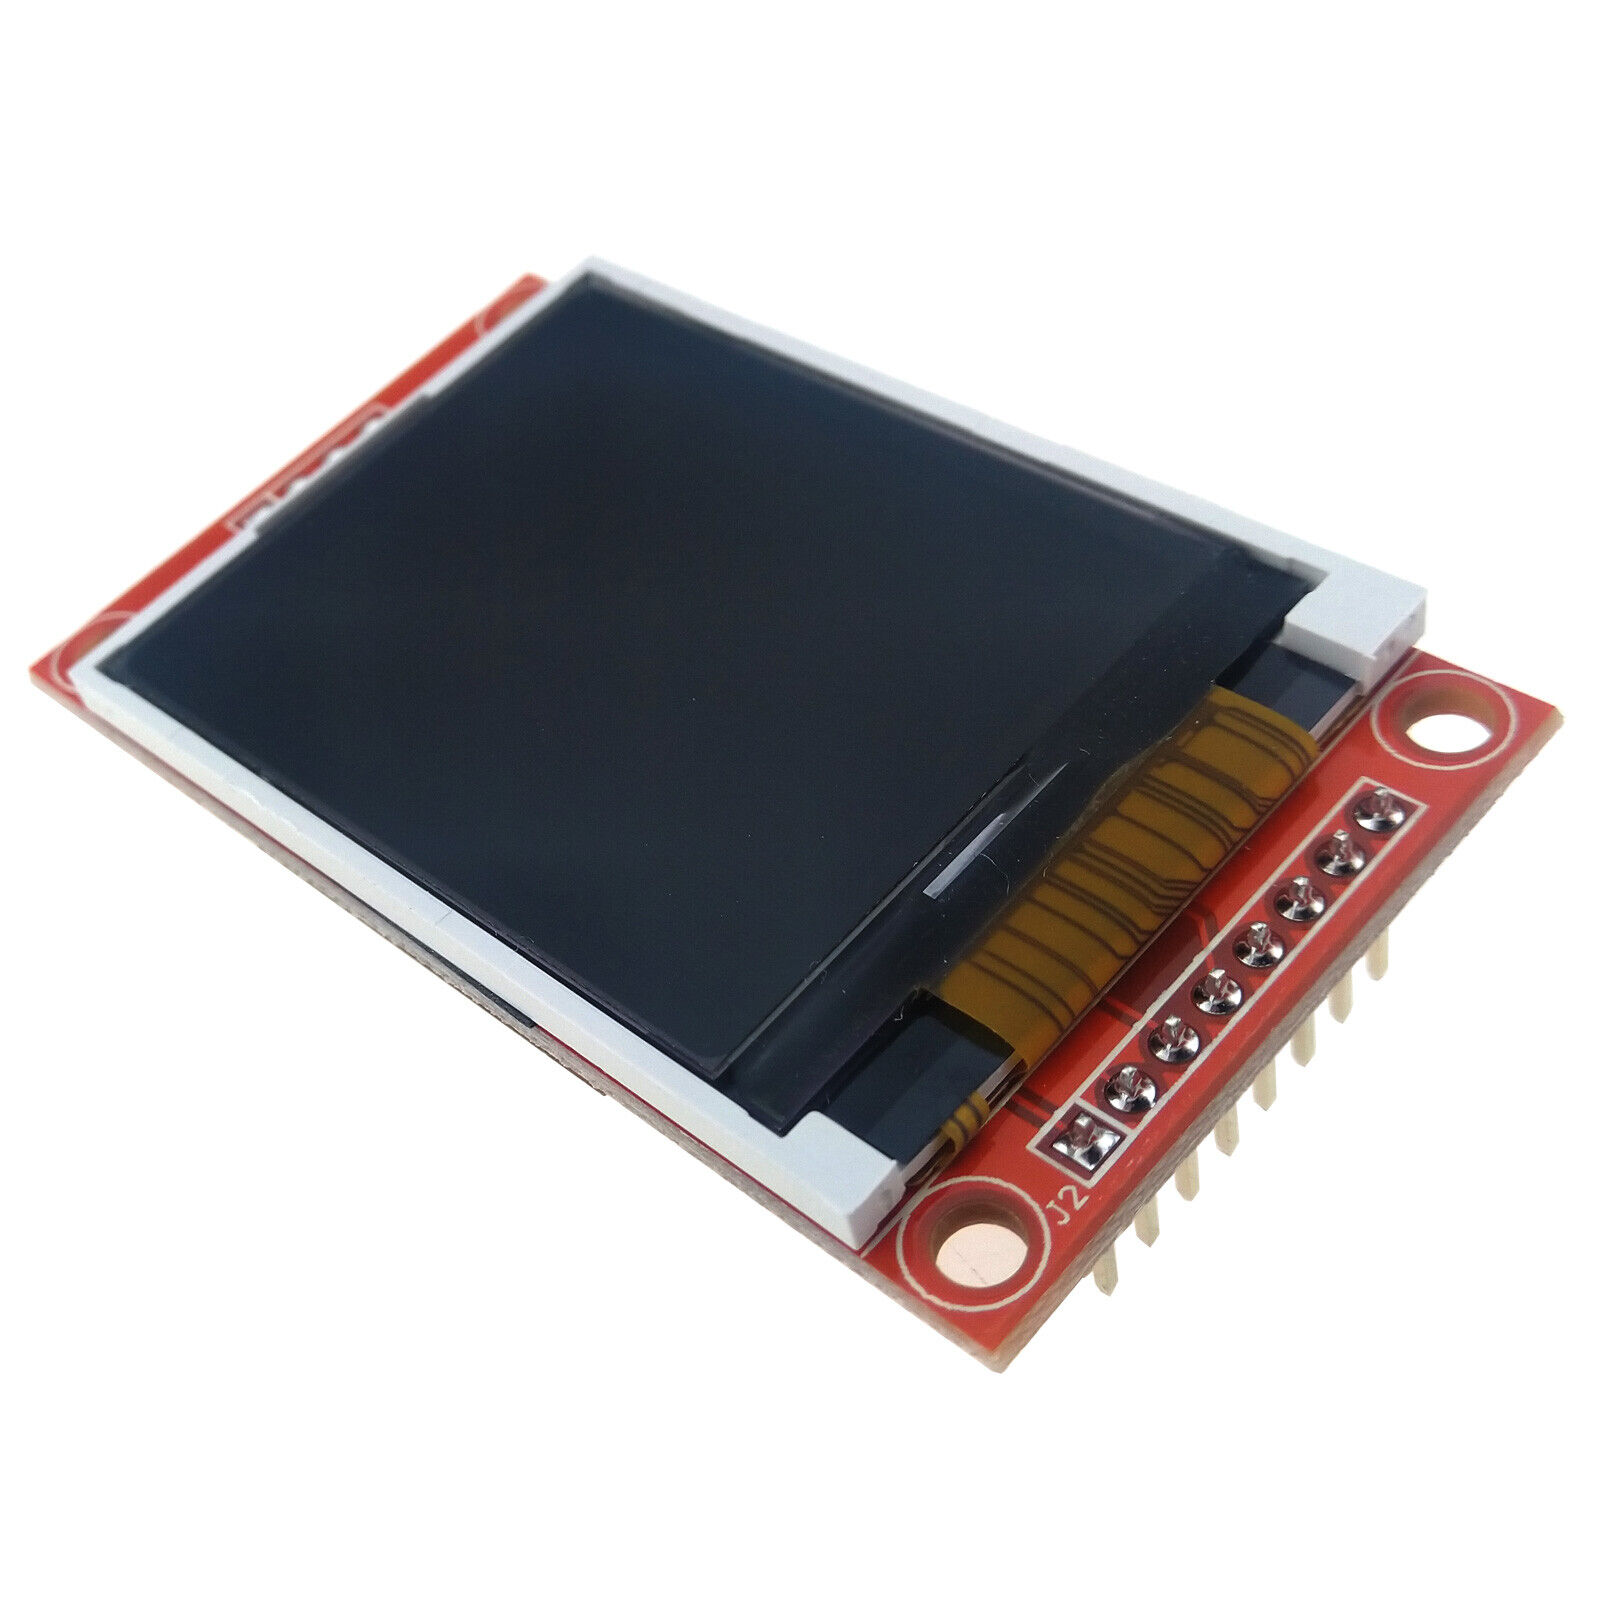 1.8 inch LCD Display Module 4-wire SPI TFT Driver ST7735 128x160 SD Socket ARM